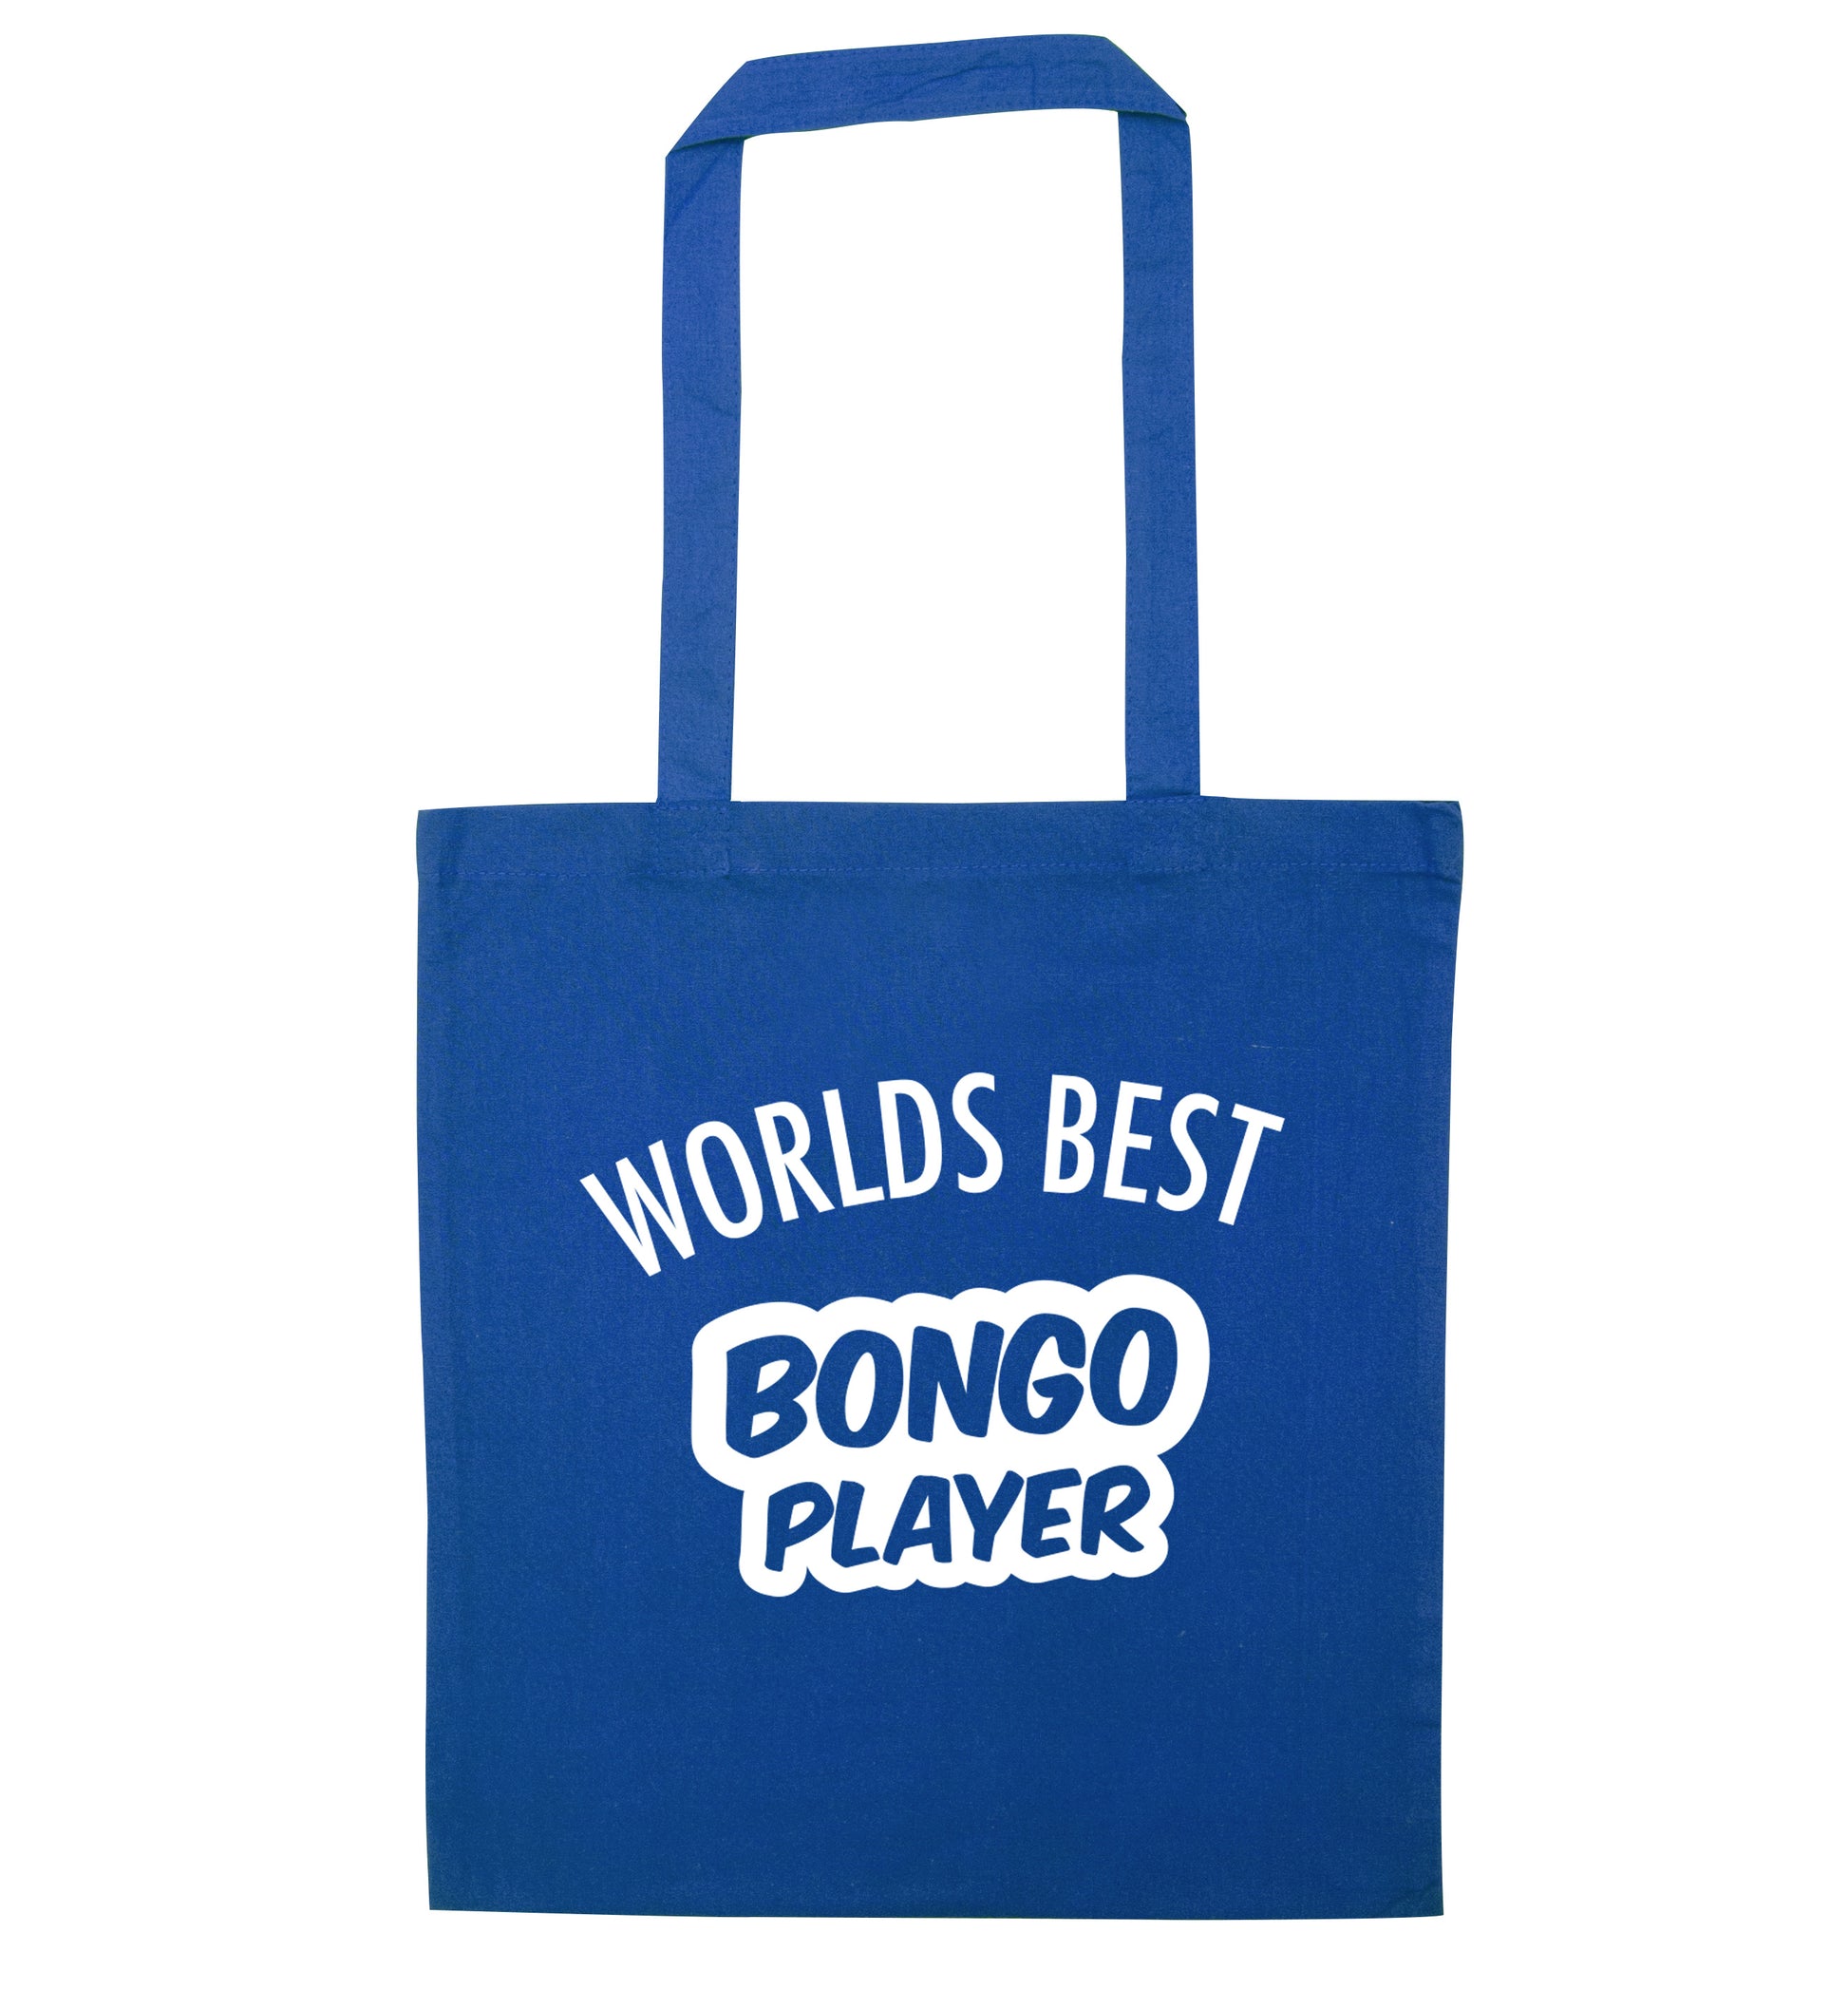 Worlds best bongo player blue tote bag